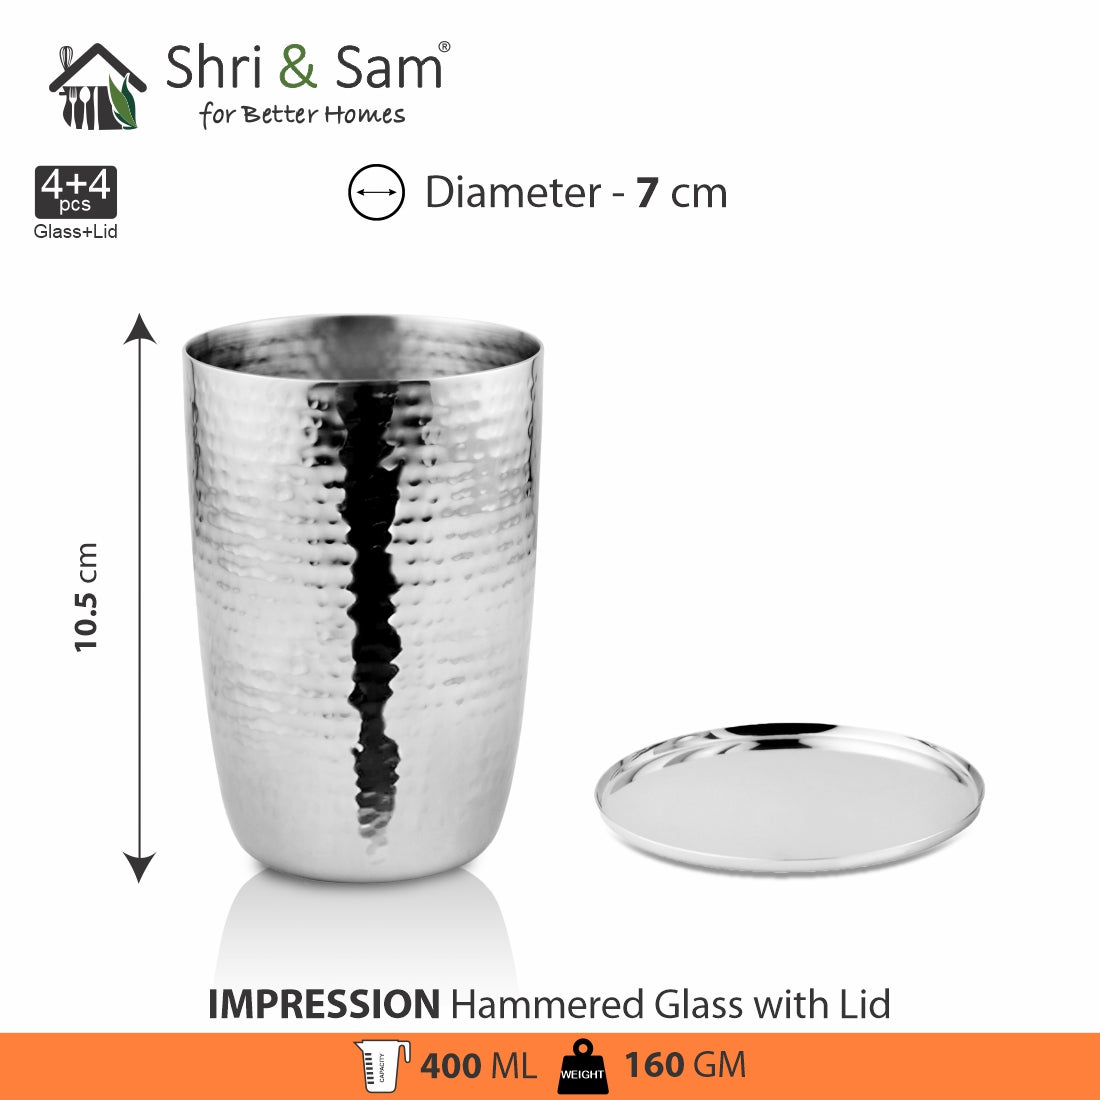 Stainless Steel 4 PCS Hammered Glass with SS Lid Impression